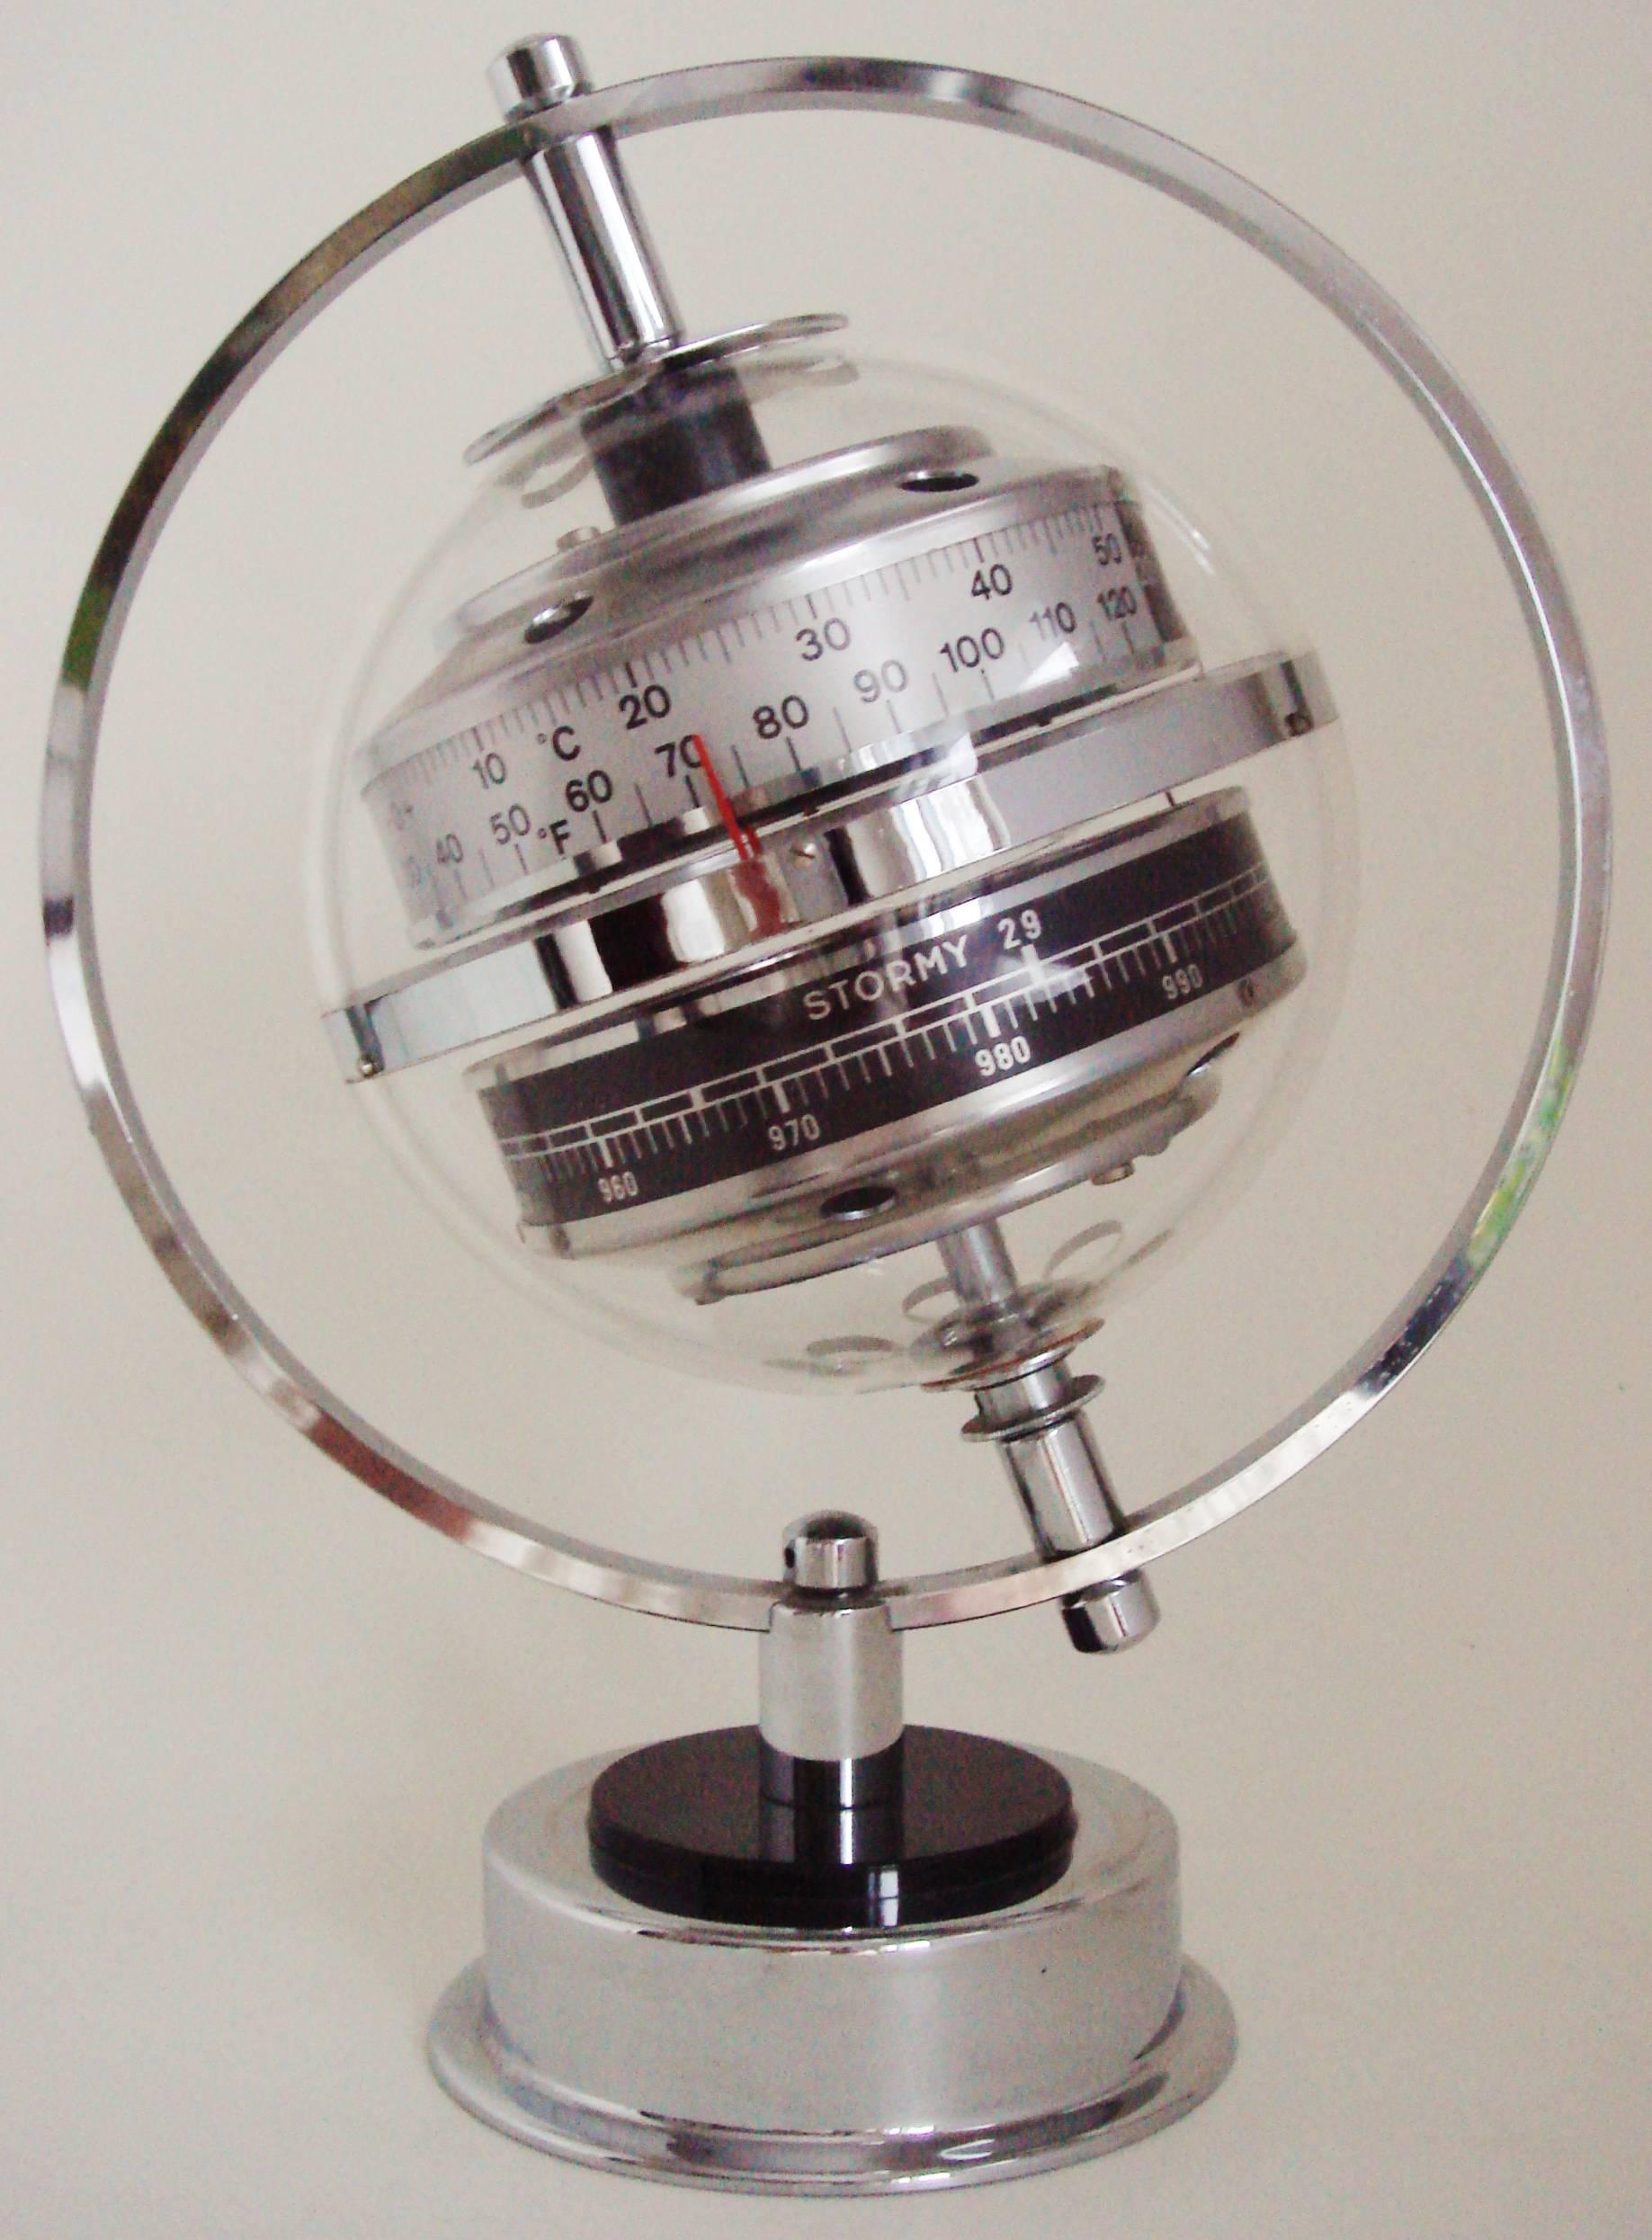 This beautiful West German chrome and Lucite desktop weather station is the stylish 1960s refinement of the iconic Sputnik weather station designed by Huber in the 1950s. It features a chrome planet ring that supports a clear Lucite globe that